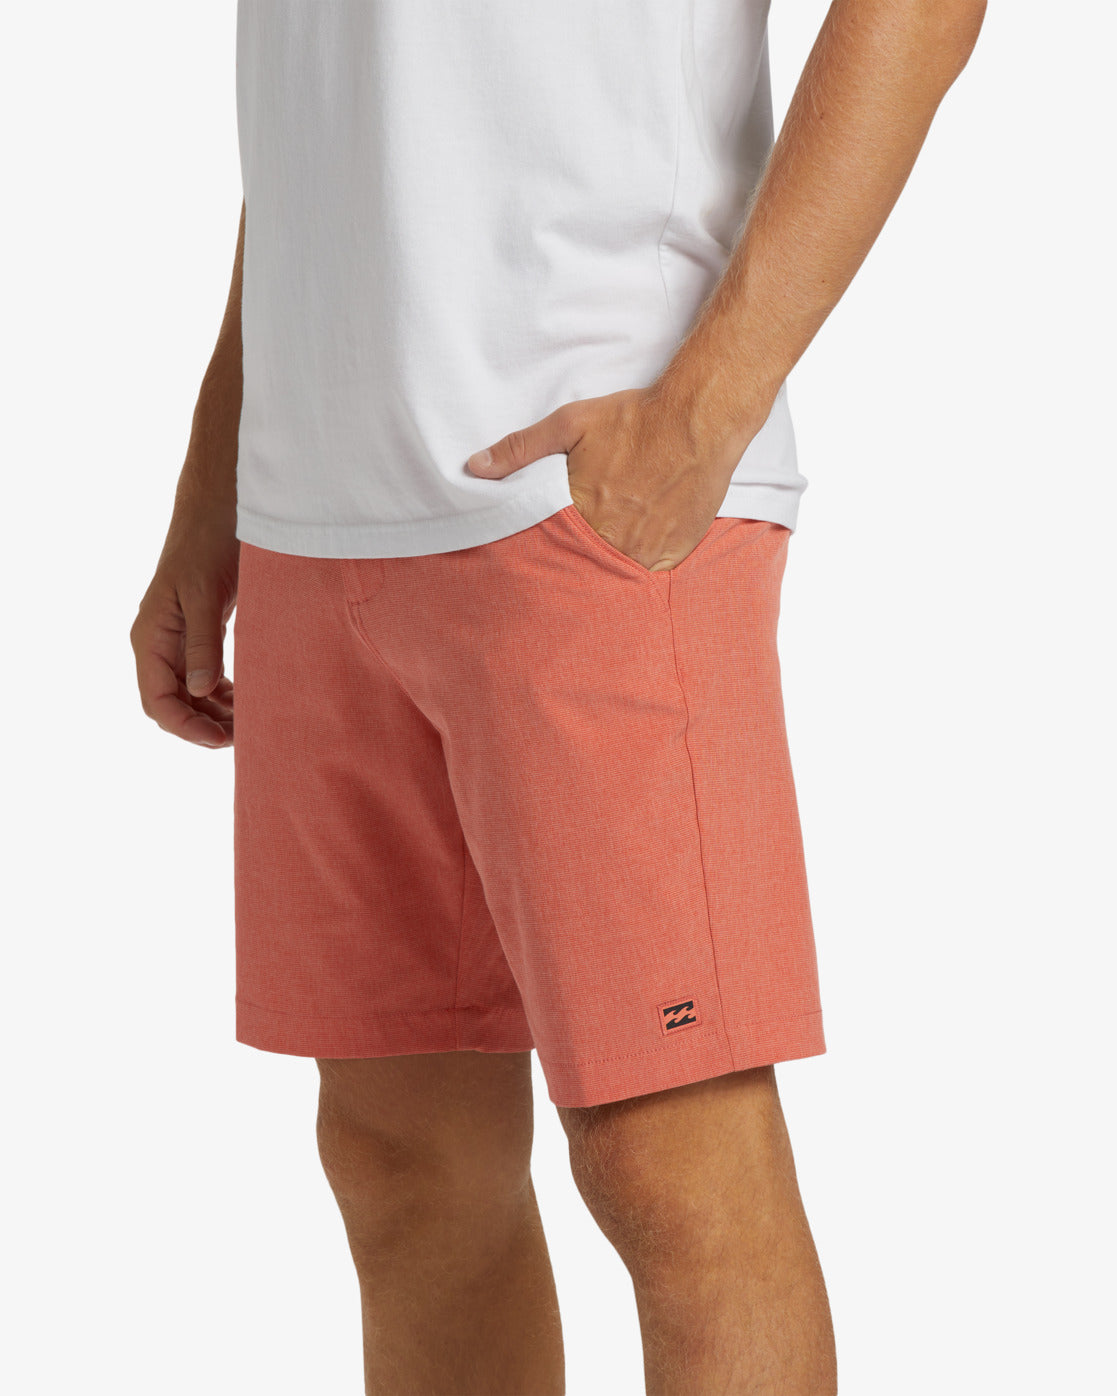 Crossfire Mid Submersible Shorts 19" - Poppy